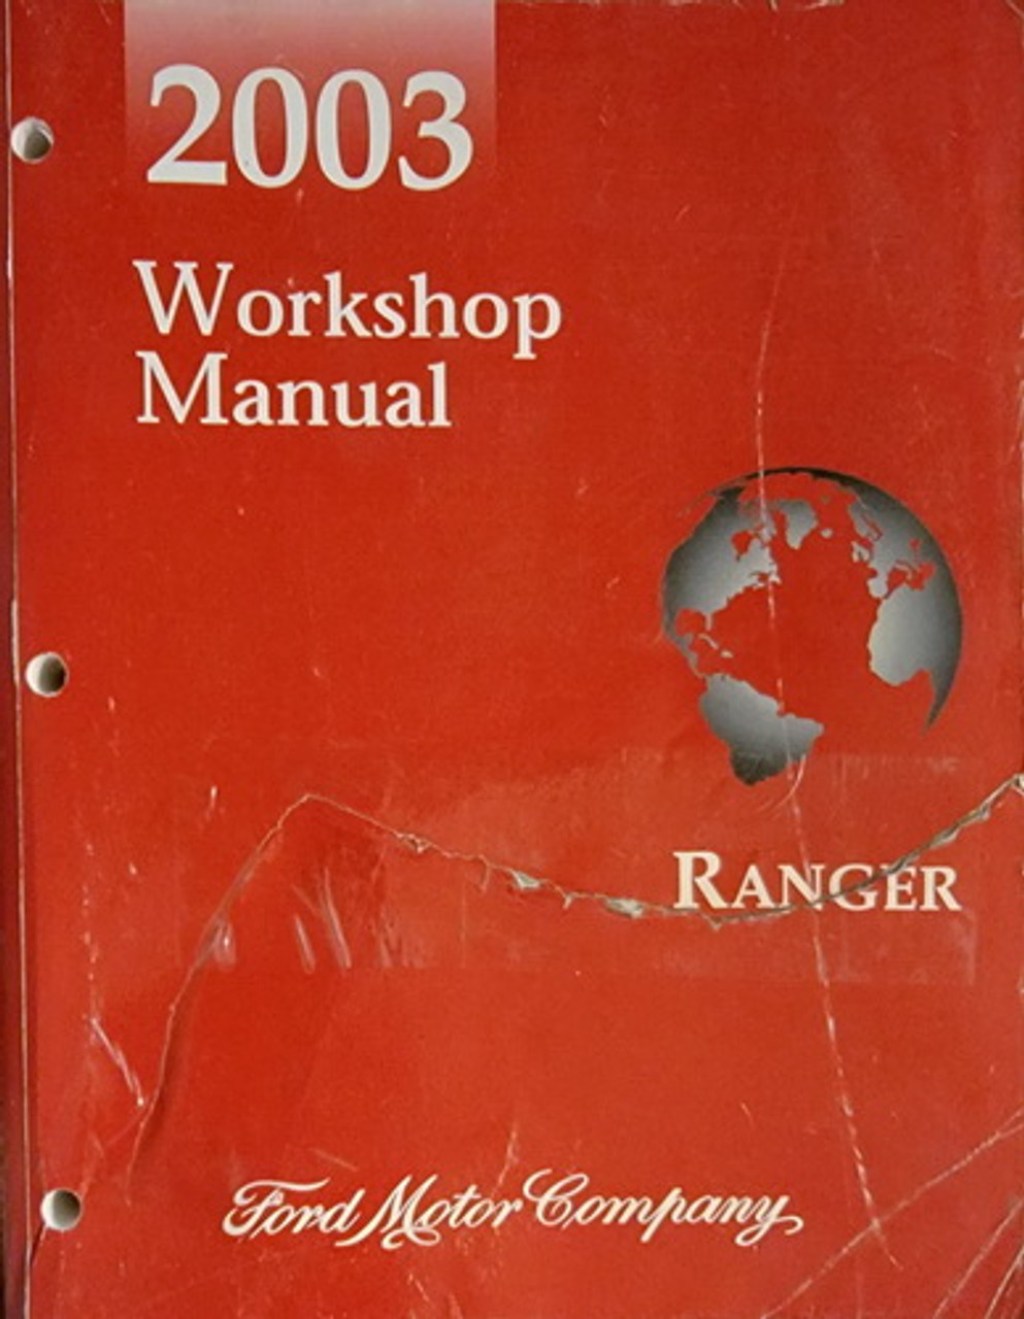 Picture of: Ford Ranger Pickup Truck Factory Service Manual Original Shop